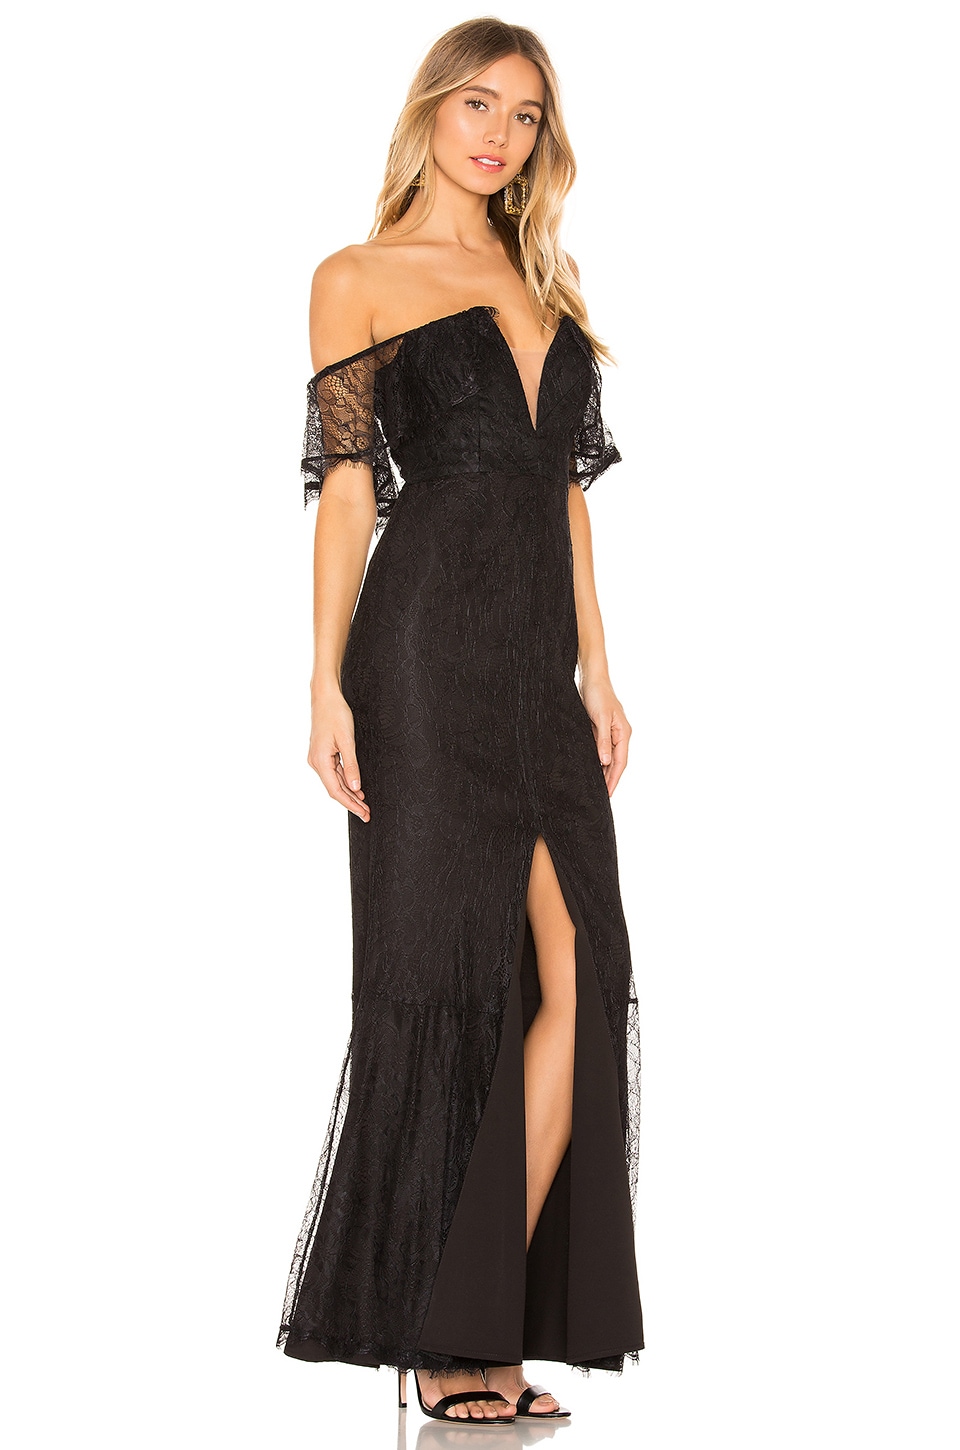 Revolve - Ana Clara Gown - Racquelle Lawrence PRODUCT PAGE = https